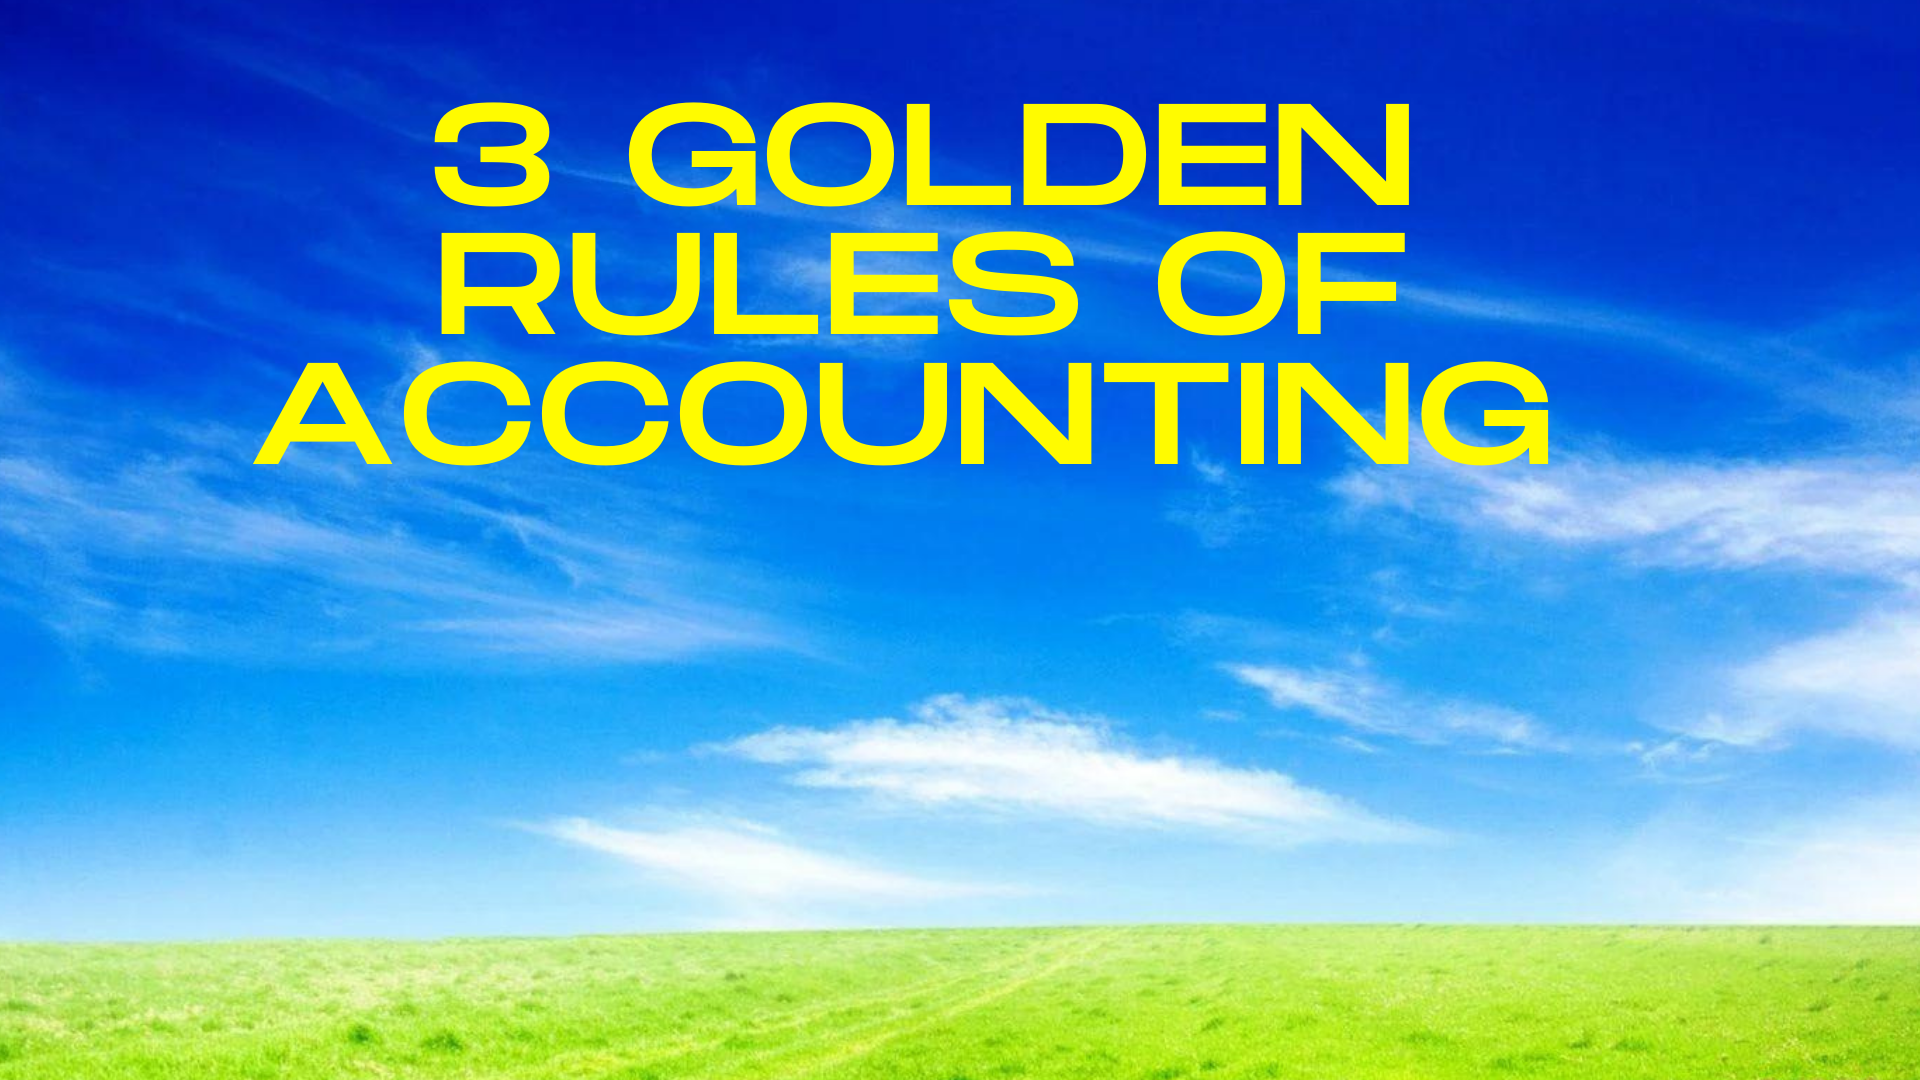 Golden rules of accounting 